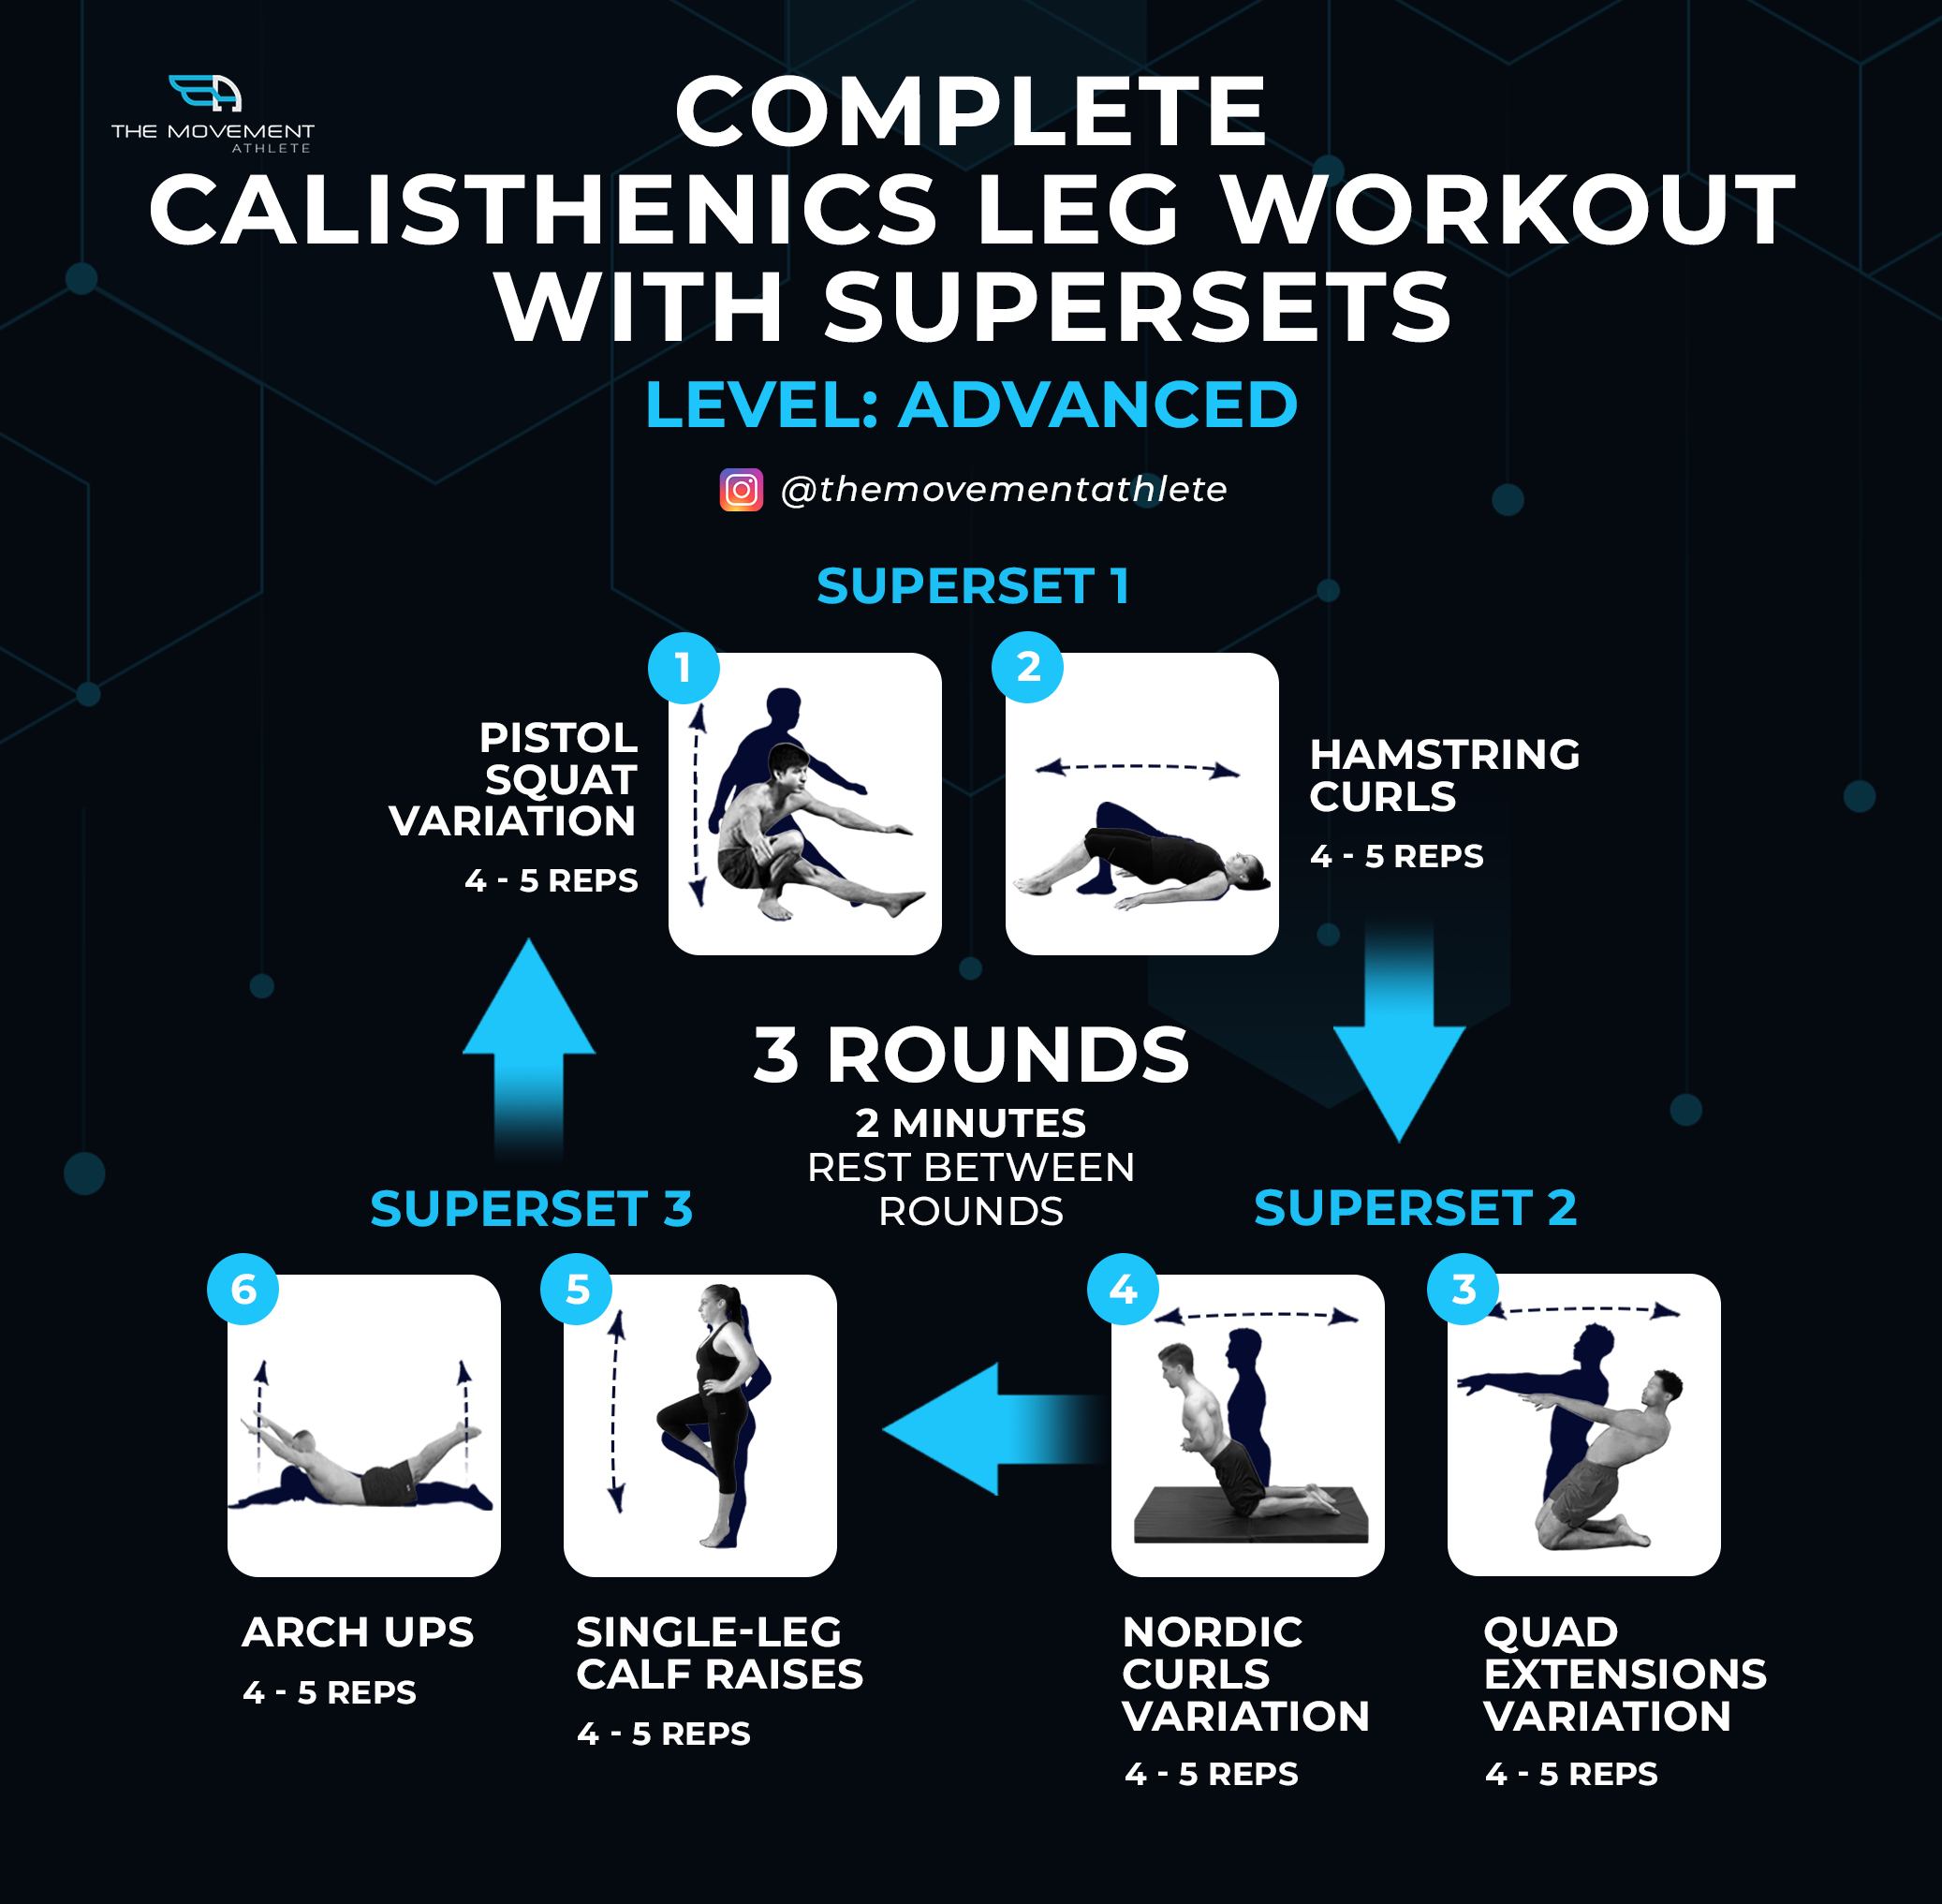 Complete Calisthenics Leg Workout with Supersets